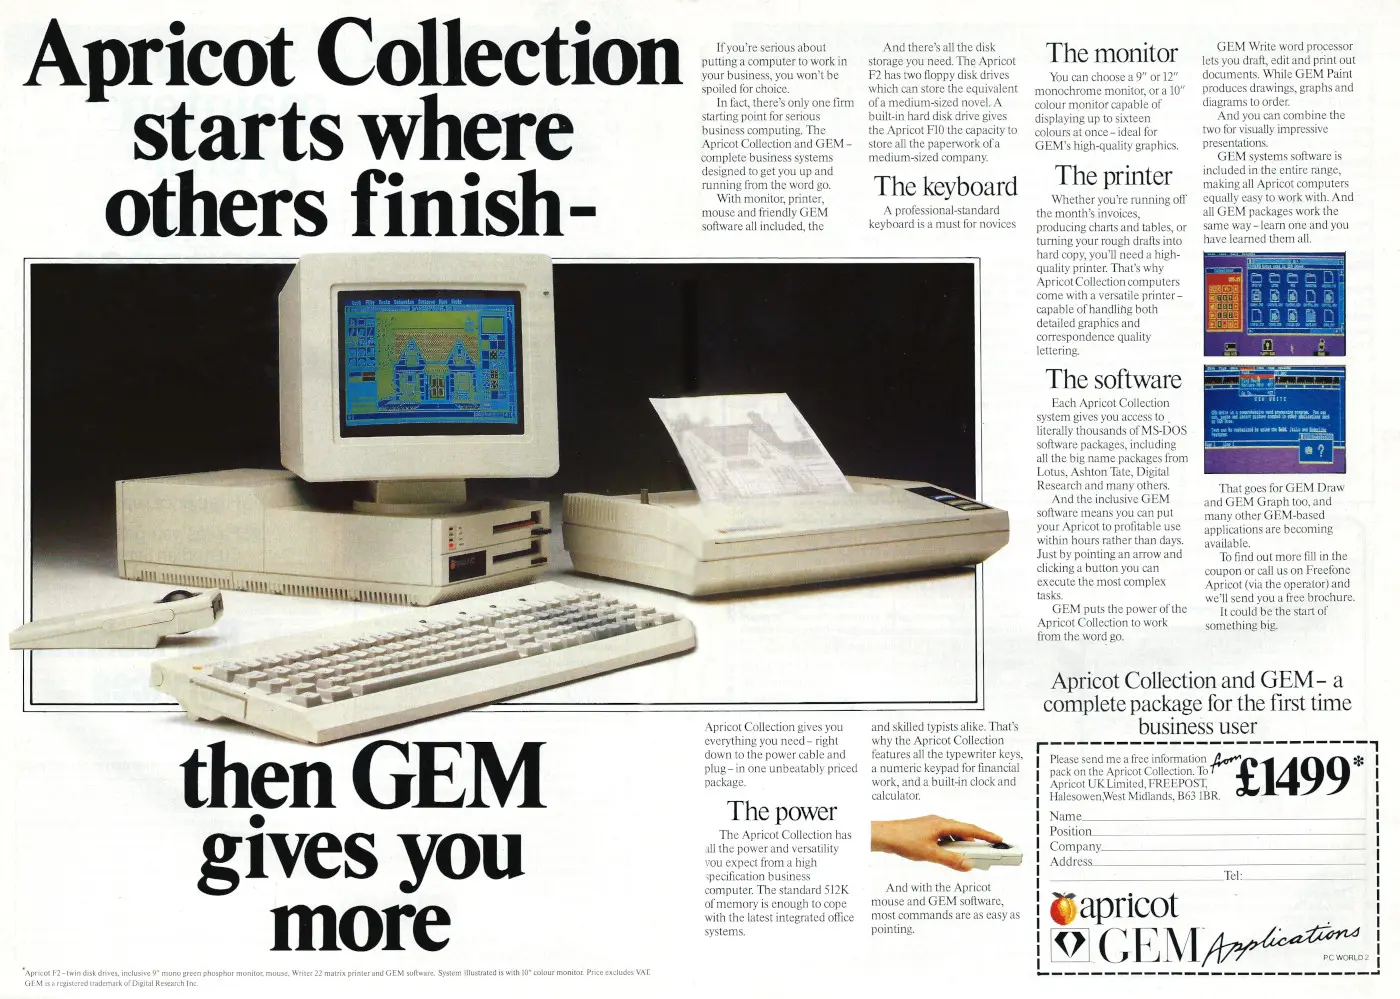 ACT/Apricot Advert: Apricot Collection starts where others finish - then GEM gives you more, from Personal Computer World, May 1986